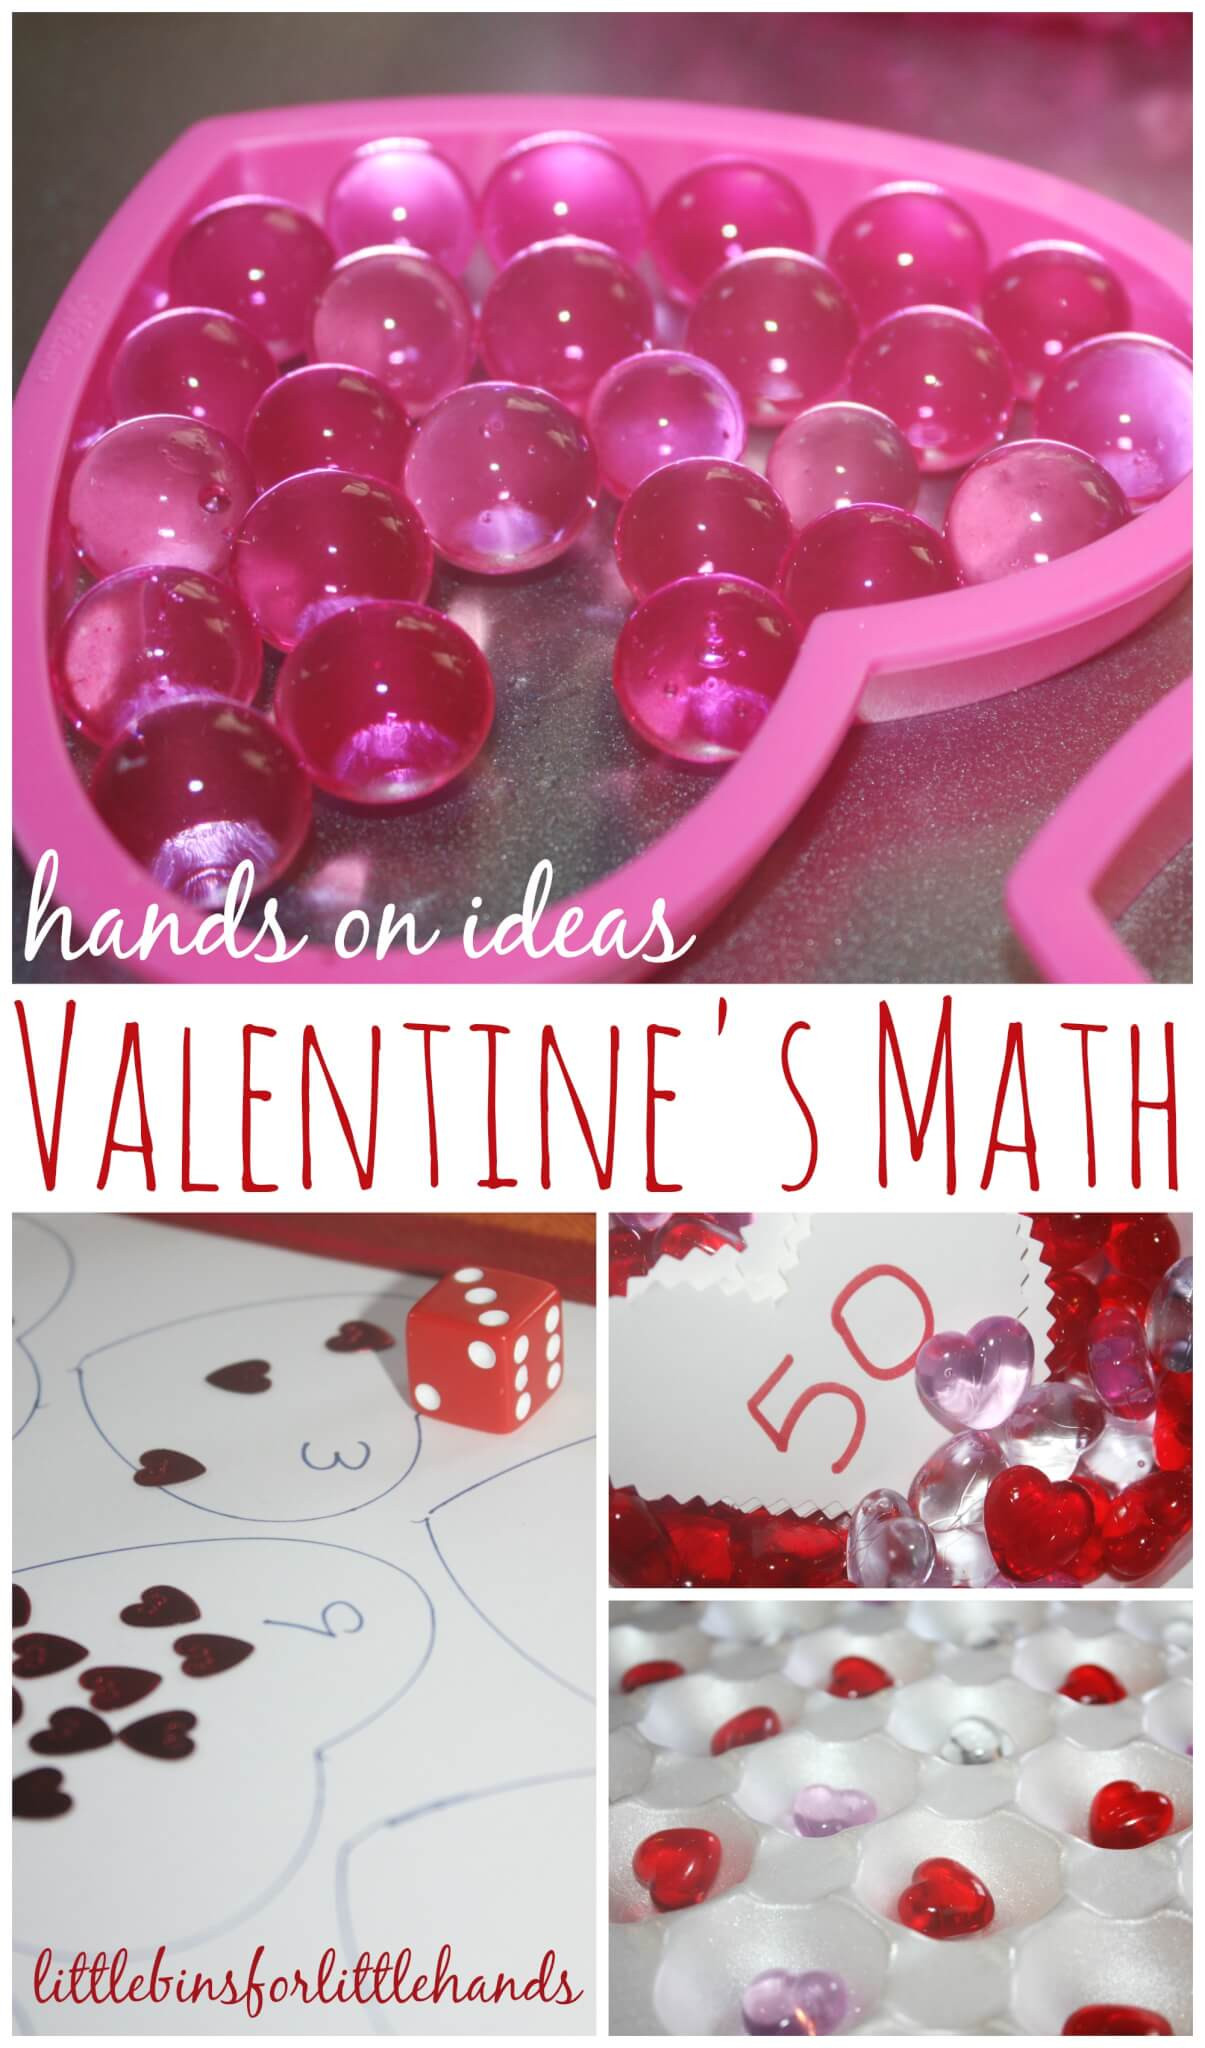 Valentines Day Ideas For Preschool
 Valentines Preschool Activities for Early Learning